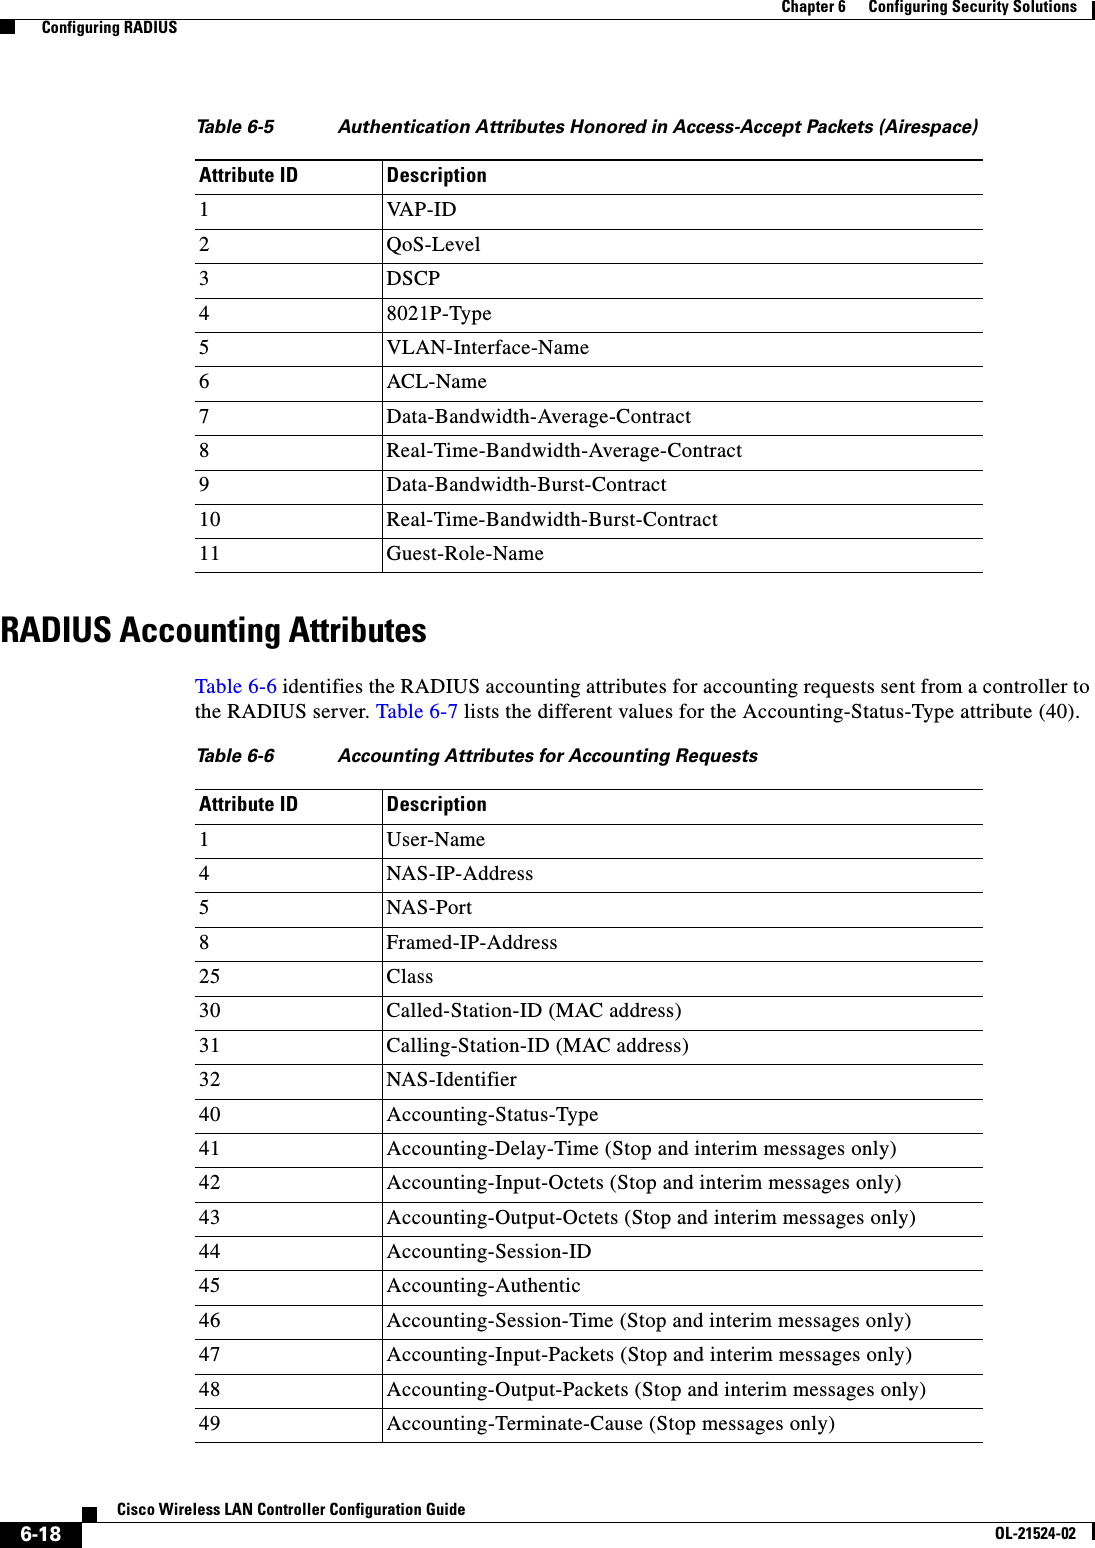  6-18Cisco Wireless LAN Controller Configuration GuideOL-21524-02Chapter 6      Configuring Security Solutions  Configuring RADIUSRADIUS Accounting AttributesTable 6-6 identifies the RADIUS accounting attributes for accounting requests sent from a controller to the RADIUS server. Table 6-7 lists the different values for the Accounting-Status-Type attribute (40).Ta b l e  6-5 Authentication Attributes Honored in Access-Accept Packets (Airespace)Attribute ID Description1VAP-ID2QoS-Level3DSCP48021P-Type5VLAN-Interface-Name6ACL-Name7Data-Bandwidth-Average-Contract8Real-Time-Bandwidth-Average-Contract9Data-Bandwidth-Burst-Contract10 Real-Time-Bandwidth-Burst-Contract11 Guest-Role-NameTa b l e  6-6 Accounting Attributes for Accounting Requests Attribute ID Description1User-Name4NAS-IP-Address5NAS-Port8Framed-IP-Address25 Class30 Called-Station-ID (MAC address)31 Calling-Station-ID (MAC address)32 NAS-Identifier40 Accounting-Status-Type41 Accounting-Delay-Time (Stop and interim messages only)42 Accounting-Input-Octets (Stop and interim messages only)43 Accounting-Output-Octets (Stop and interim messages only)44 Accounting-Session-ID45 Accounting-Authentic46 Accounting-Session-Time (Stop and interim messages only)47 Accounting-Input-Packets (Stop and interim messages only)48 Accounting-Output-Packets (Stop and interim messages only)49 Accounting-Terminate-Cause (Stop messages only)